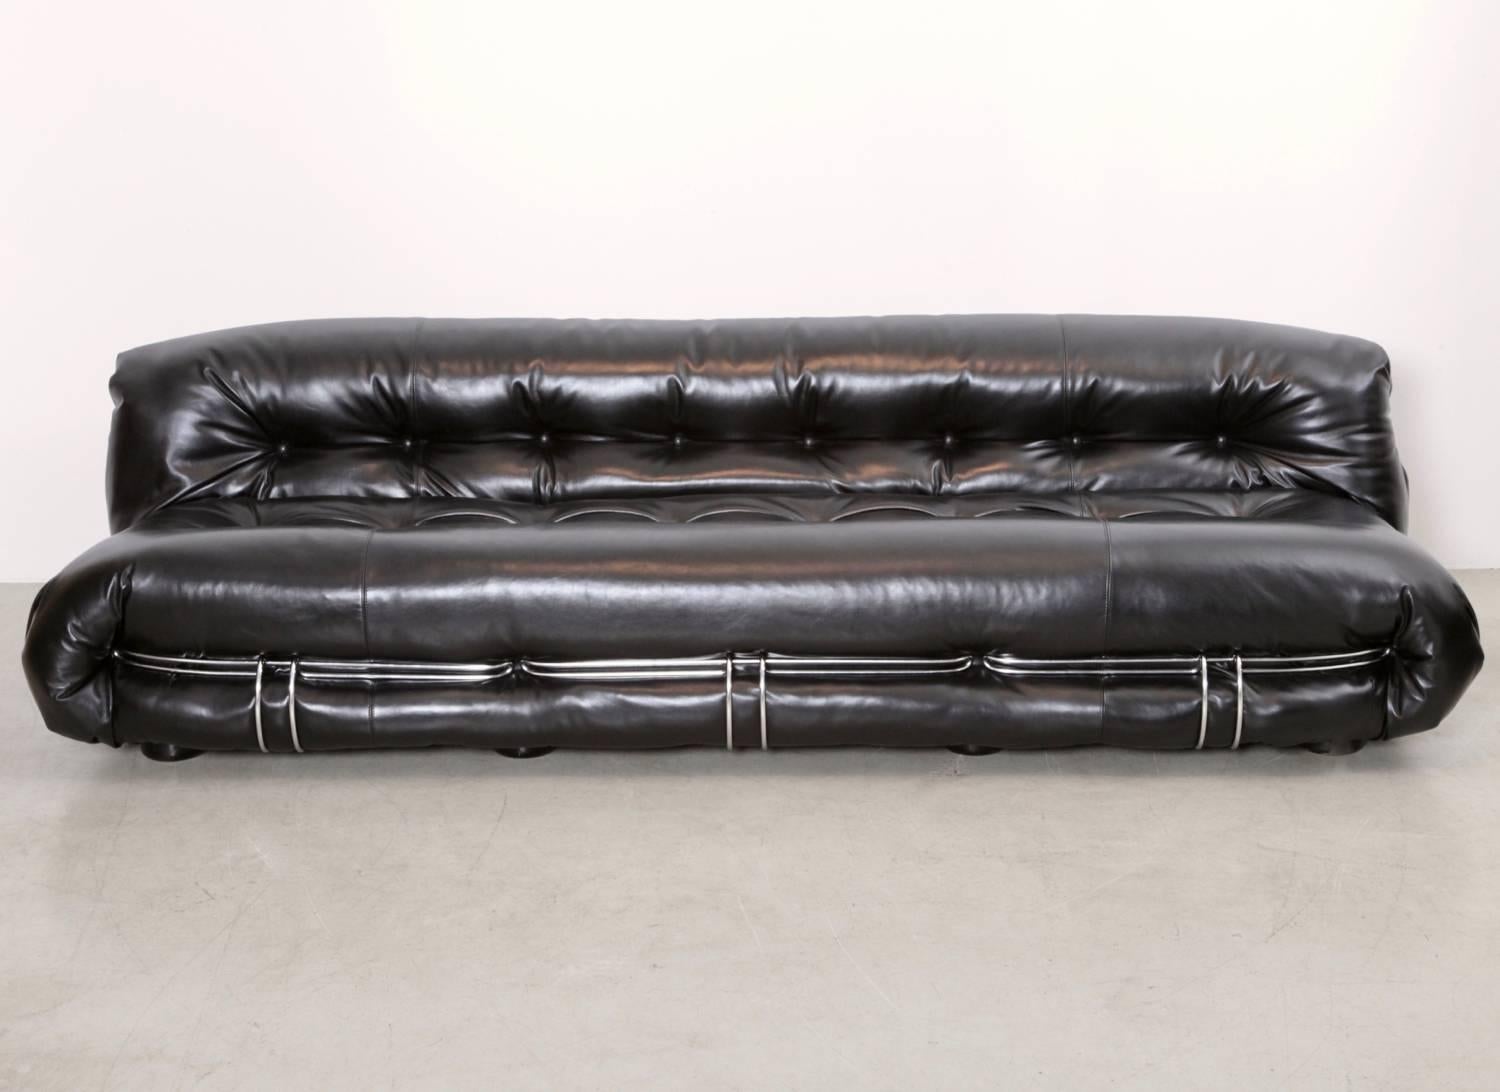 New upholstered Soriana sofa set of a three-seat and a settee in high quality black leather by Cassina.
Measure: The settee is 65 cm H x 165 cm W x 100 cm D.